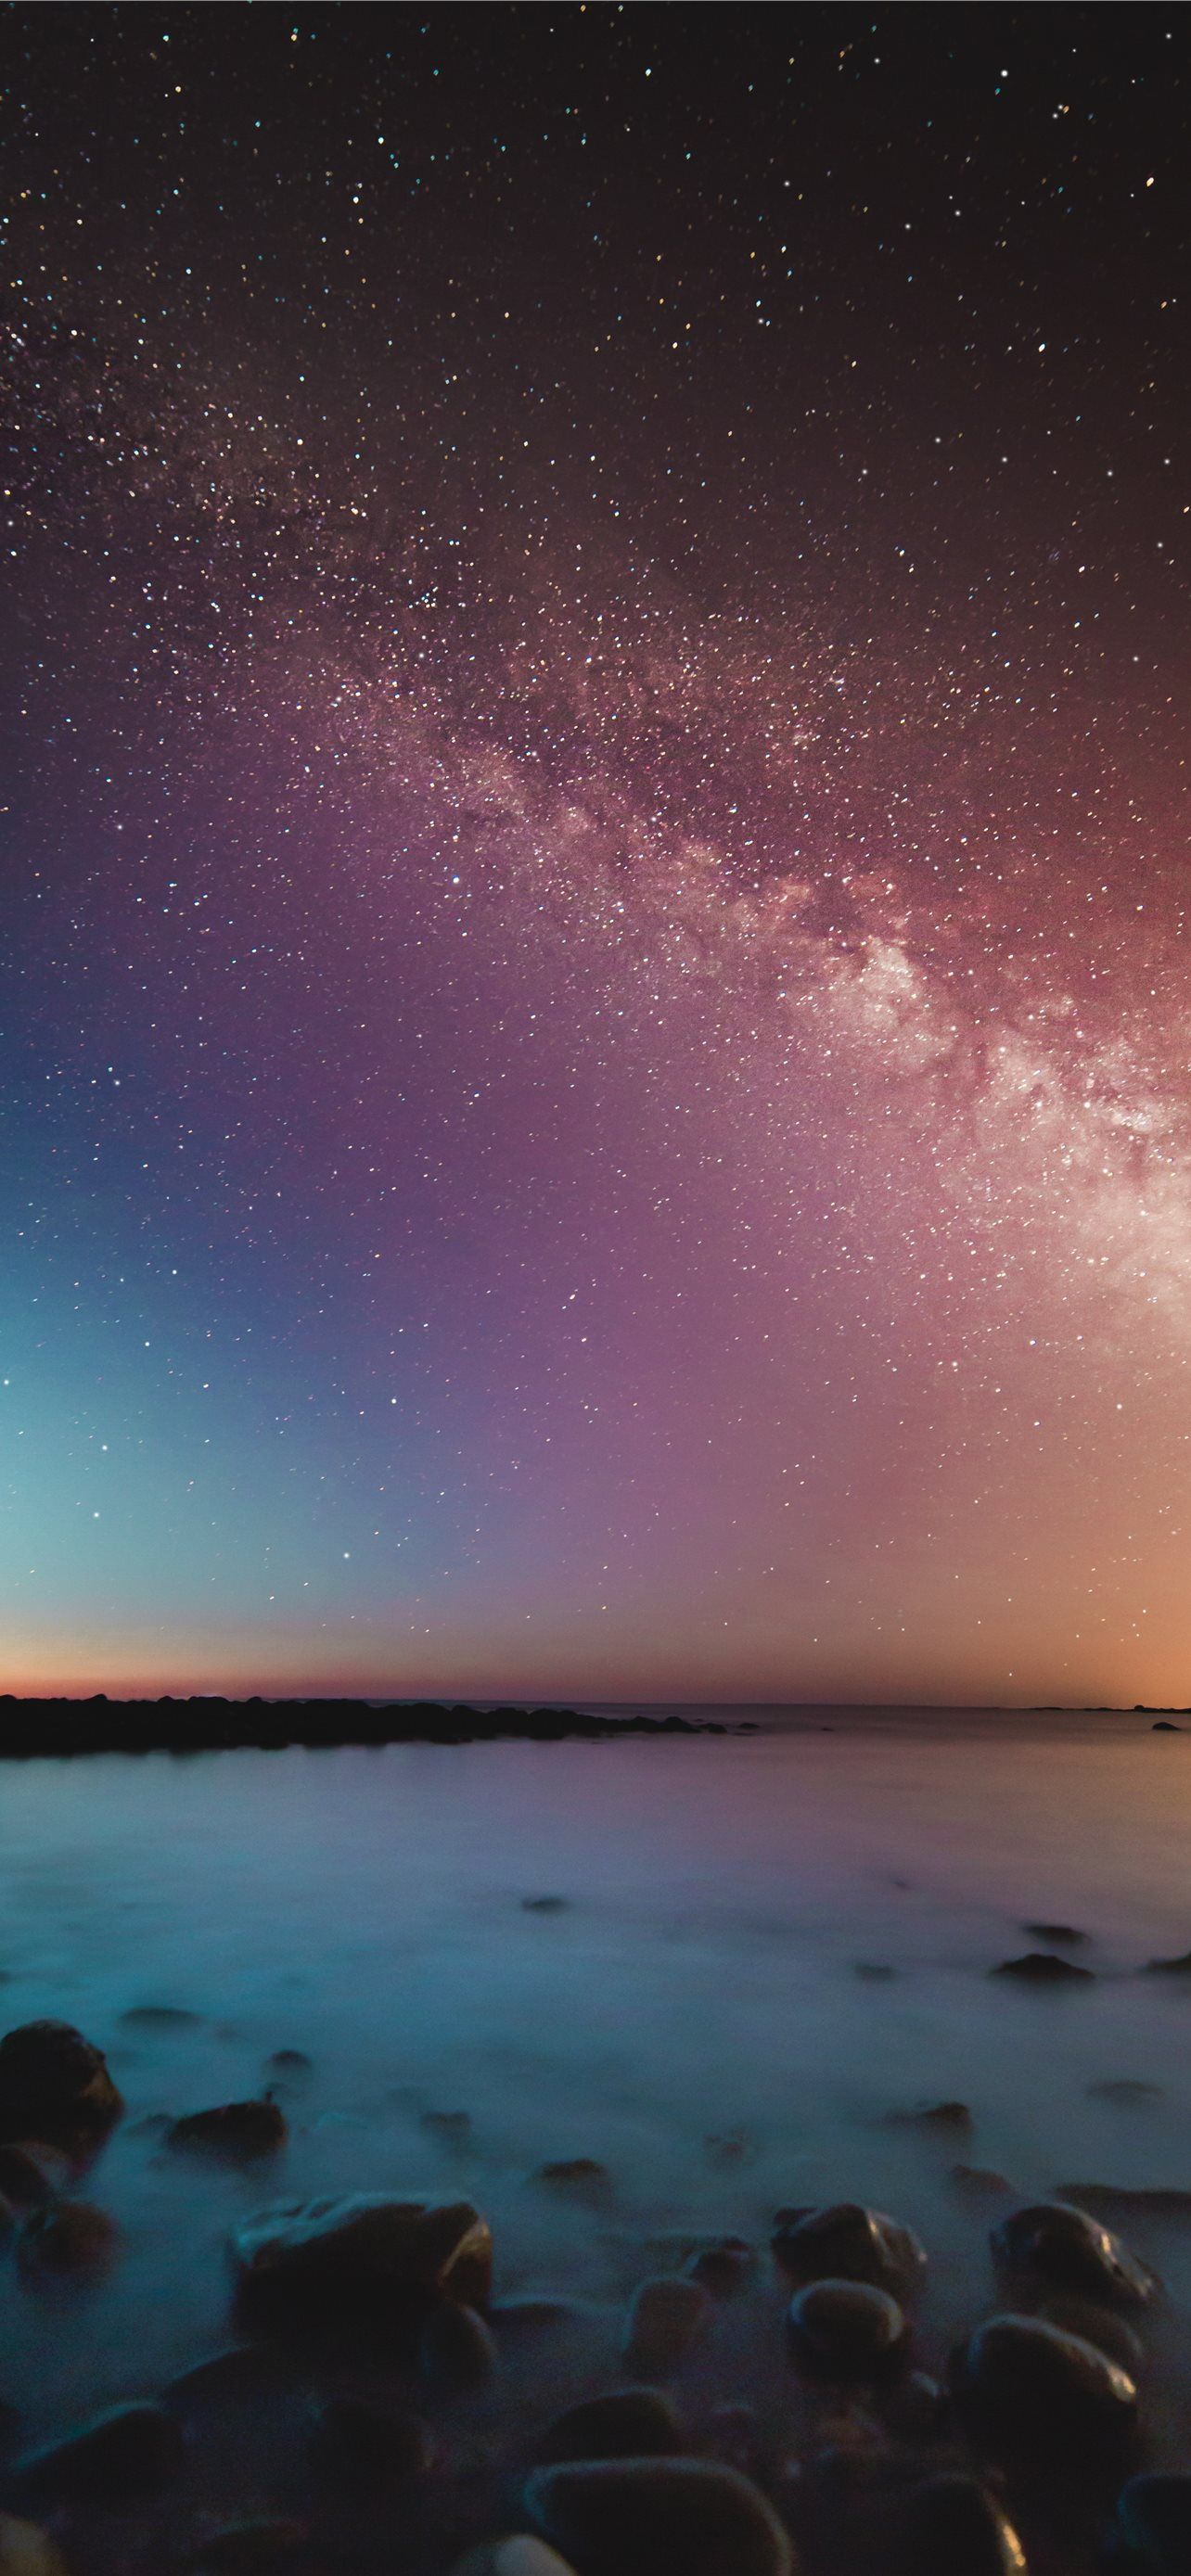 Sea of Stars Wallpapers - Top Free Sea of Stars Backgrounds ...